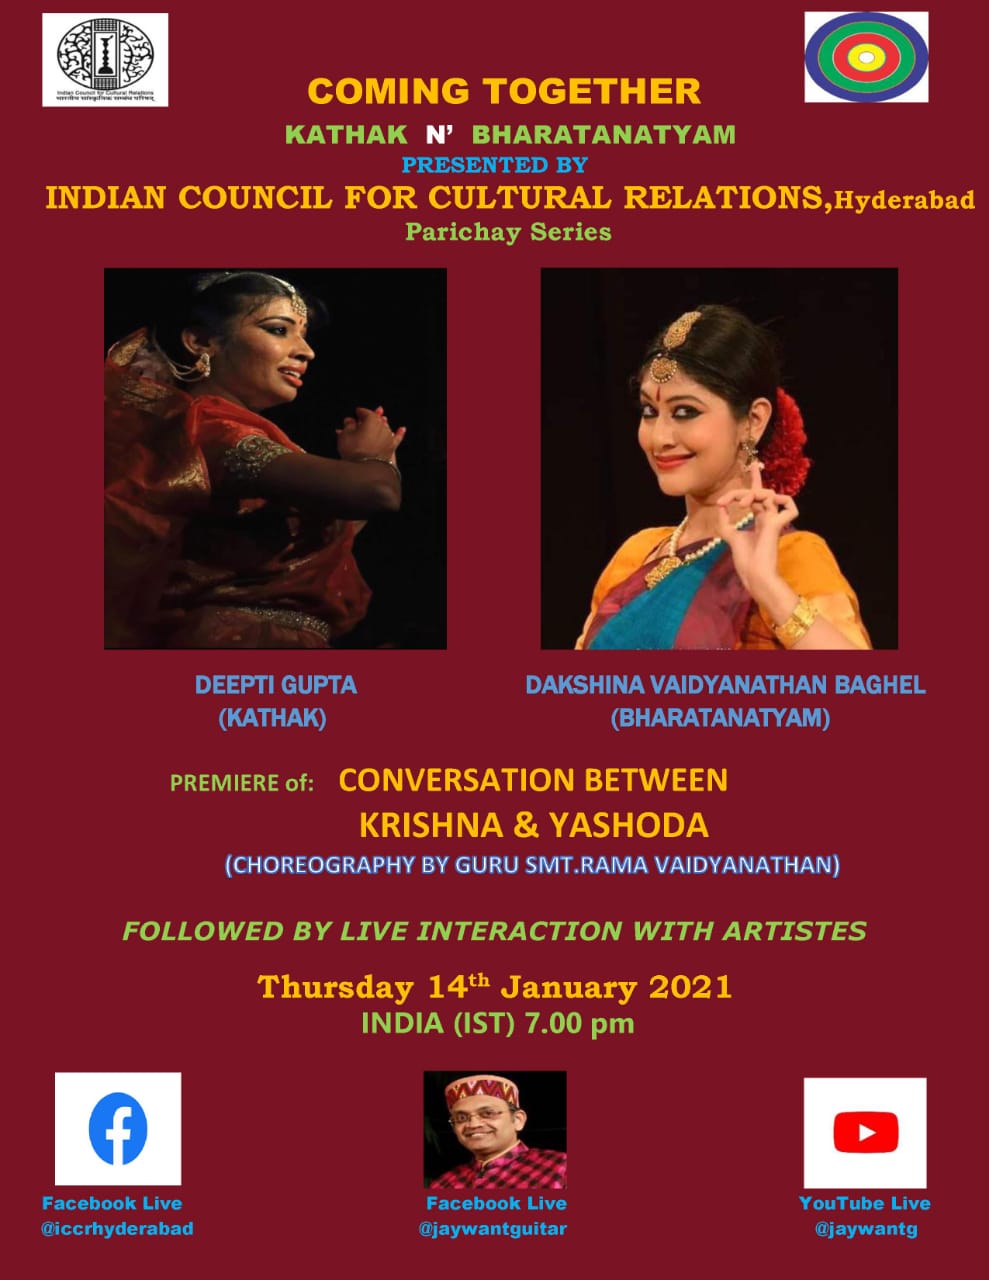 ICCR Hyderabad Is organizing a Kathak and Bharatanatyam performance under parichey series on 14 January 2021 from 7:00 .